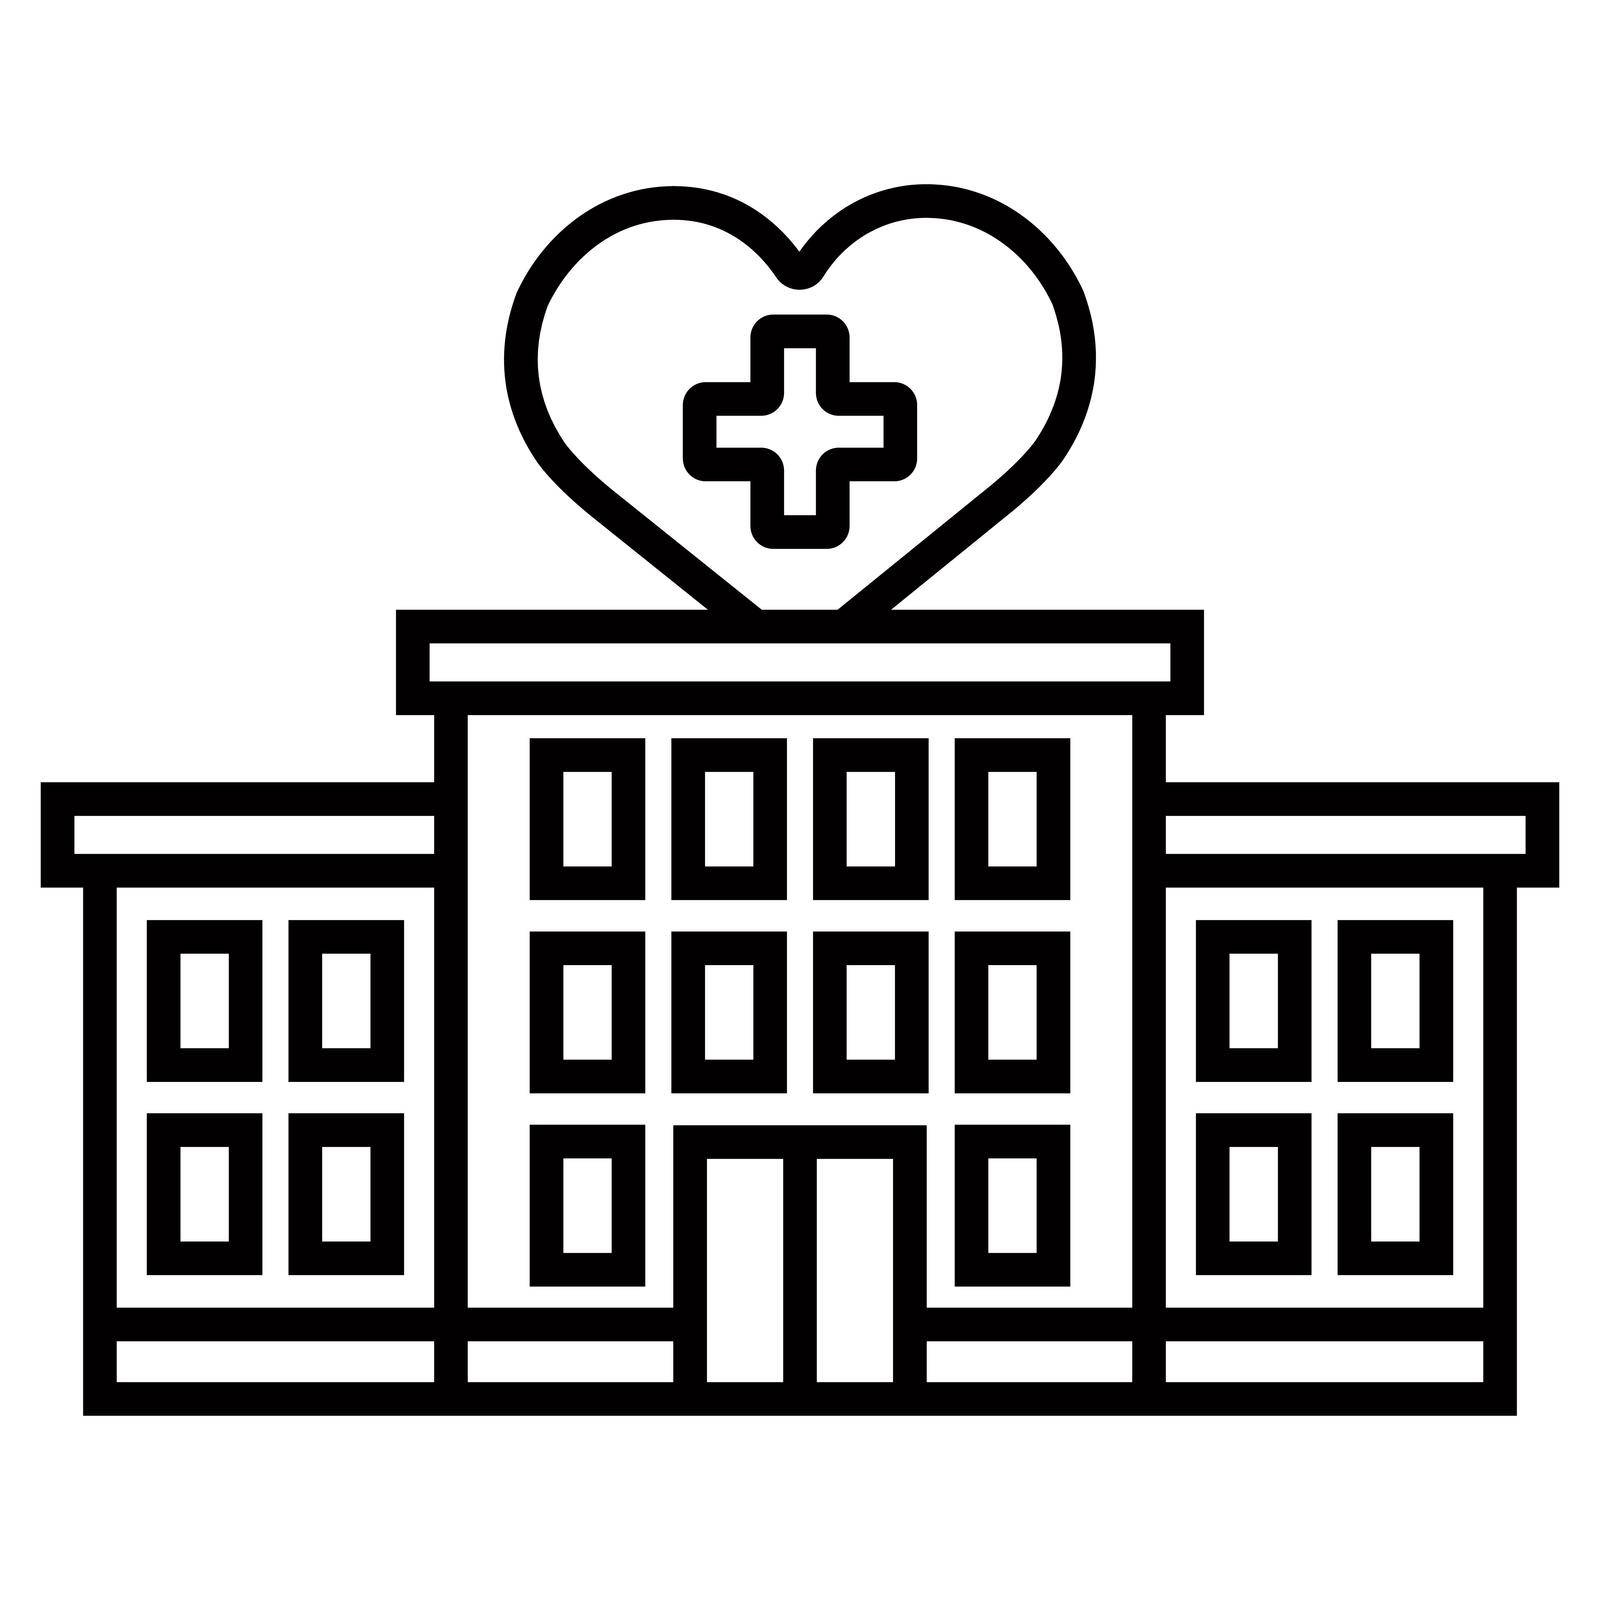 hospital building black icon for sick patients. flat vector illustration.